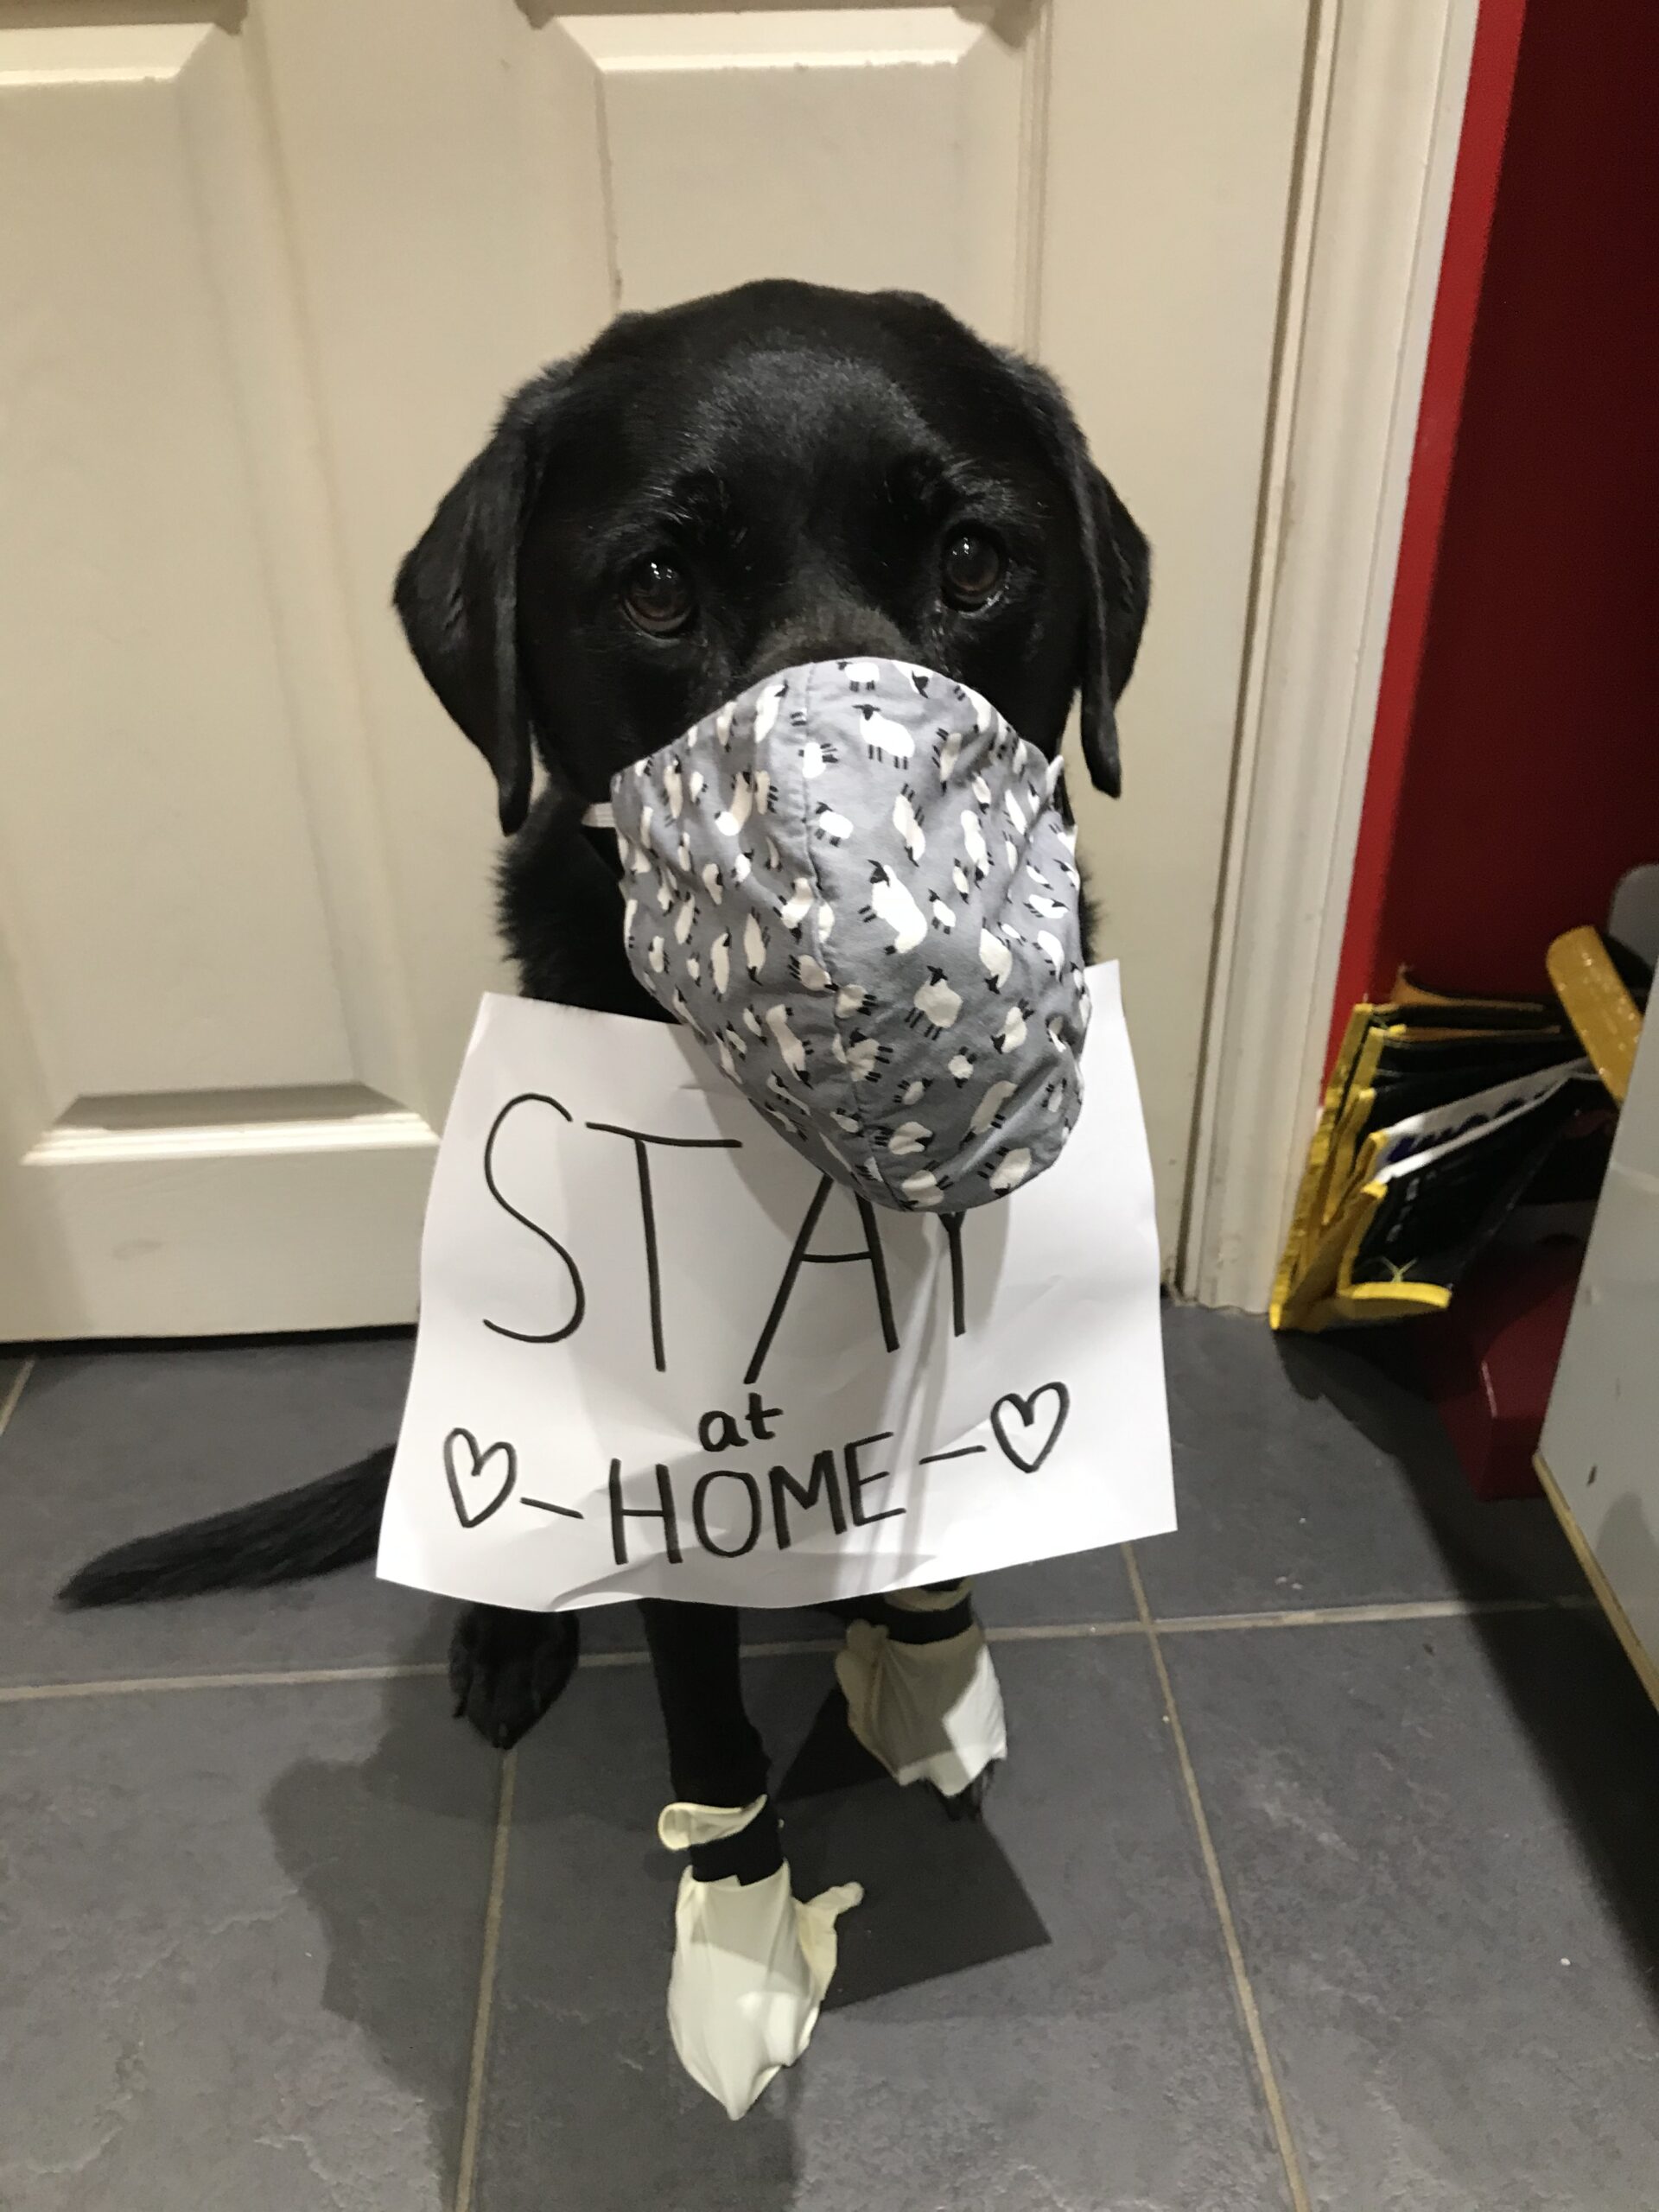 Charles our labrador wants you all to stay safe and take every precaution......